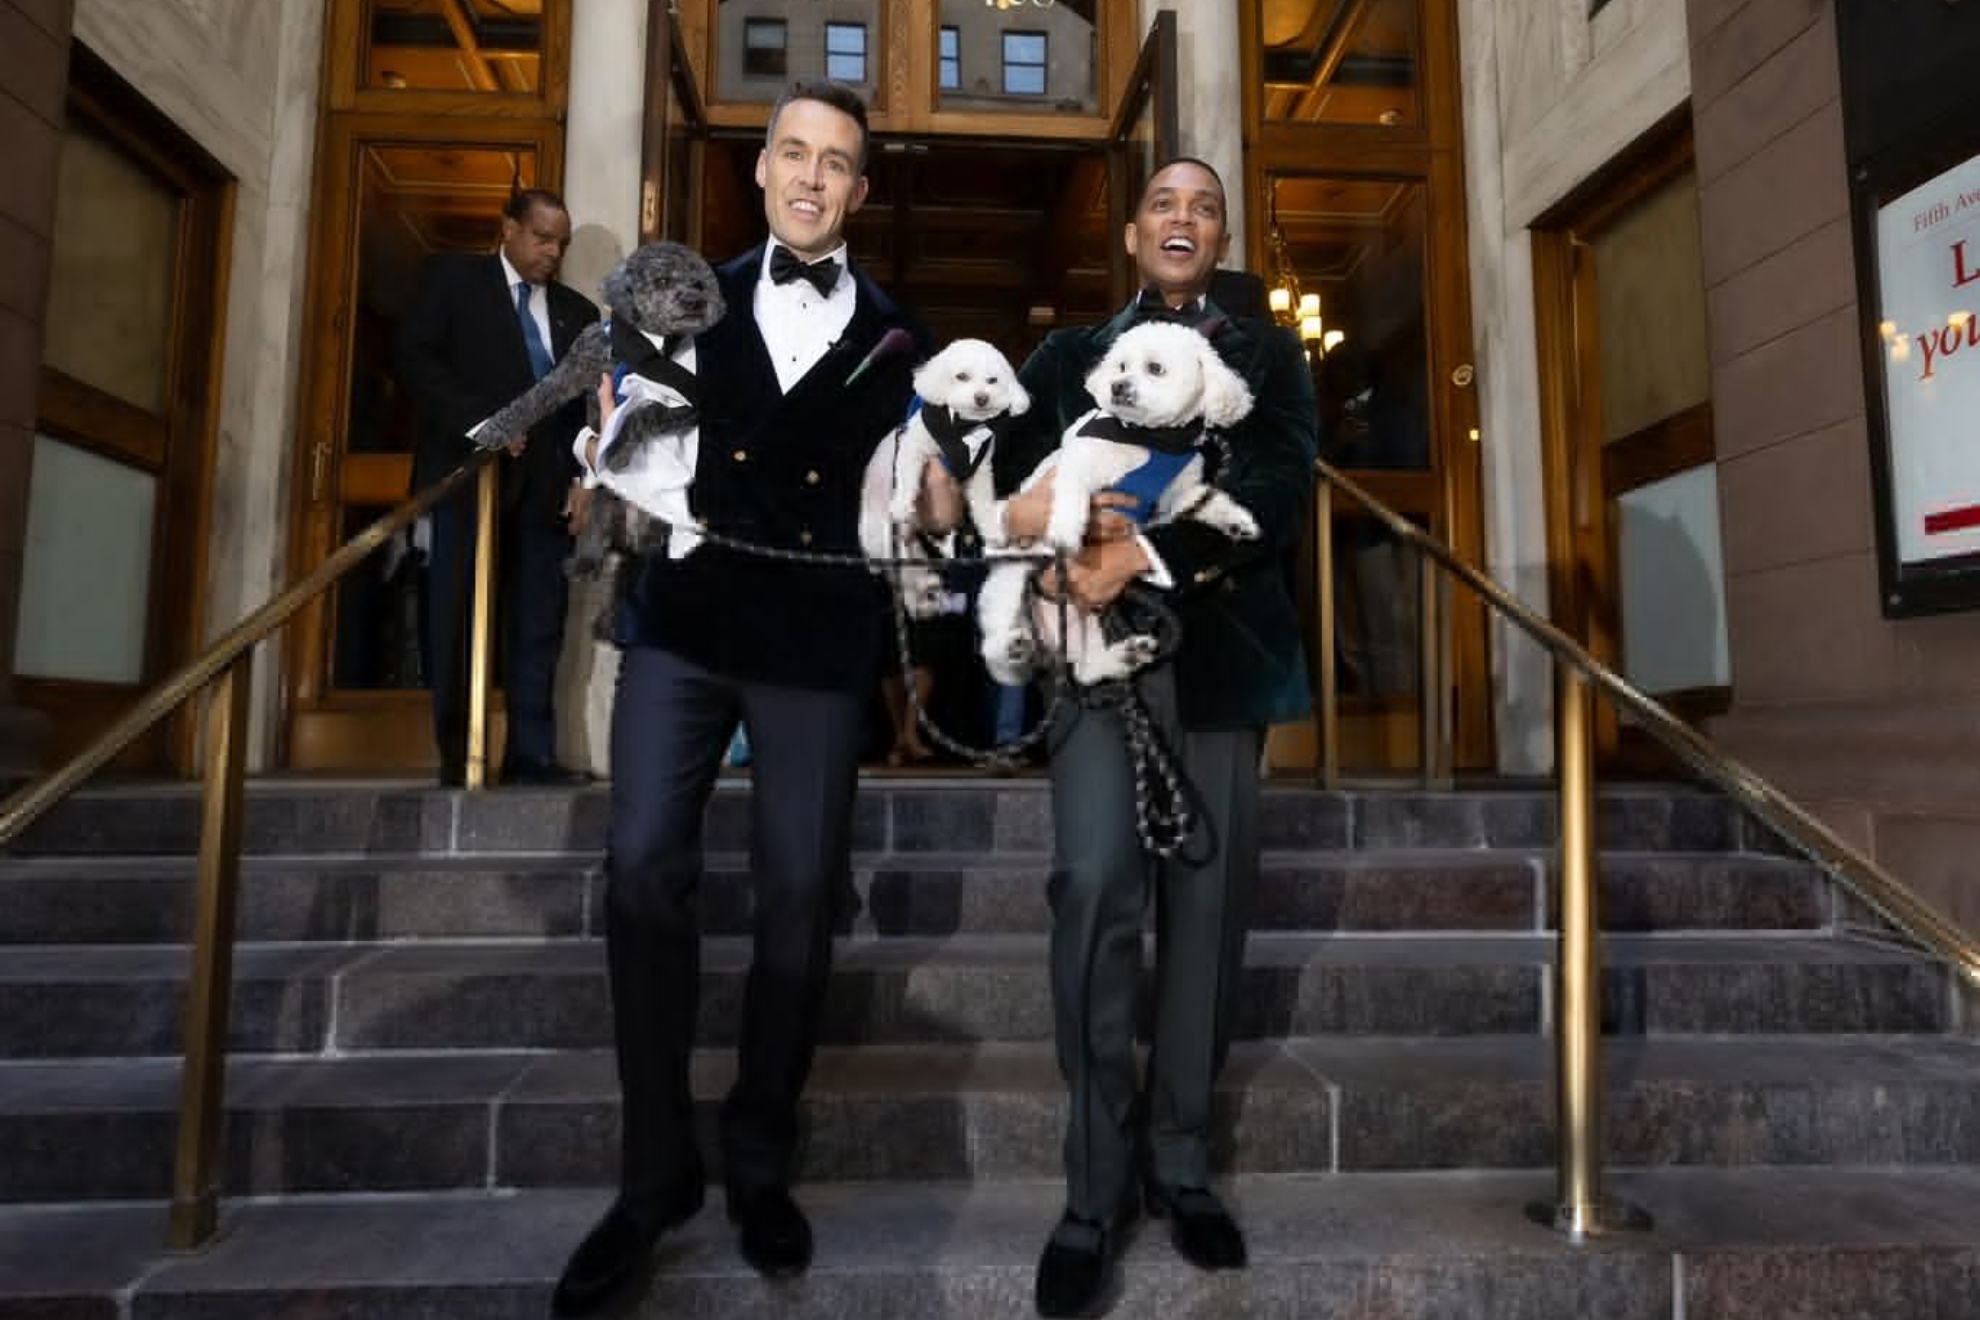 Former CNN anchor Don Lemon marries fianc Tim Malone in private New York ceremony